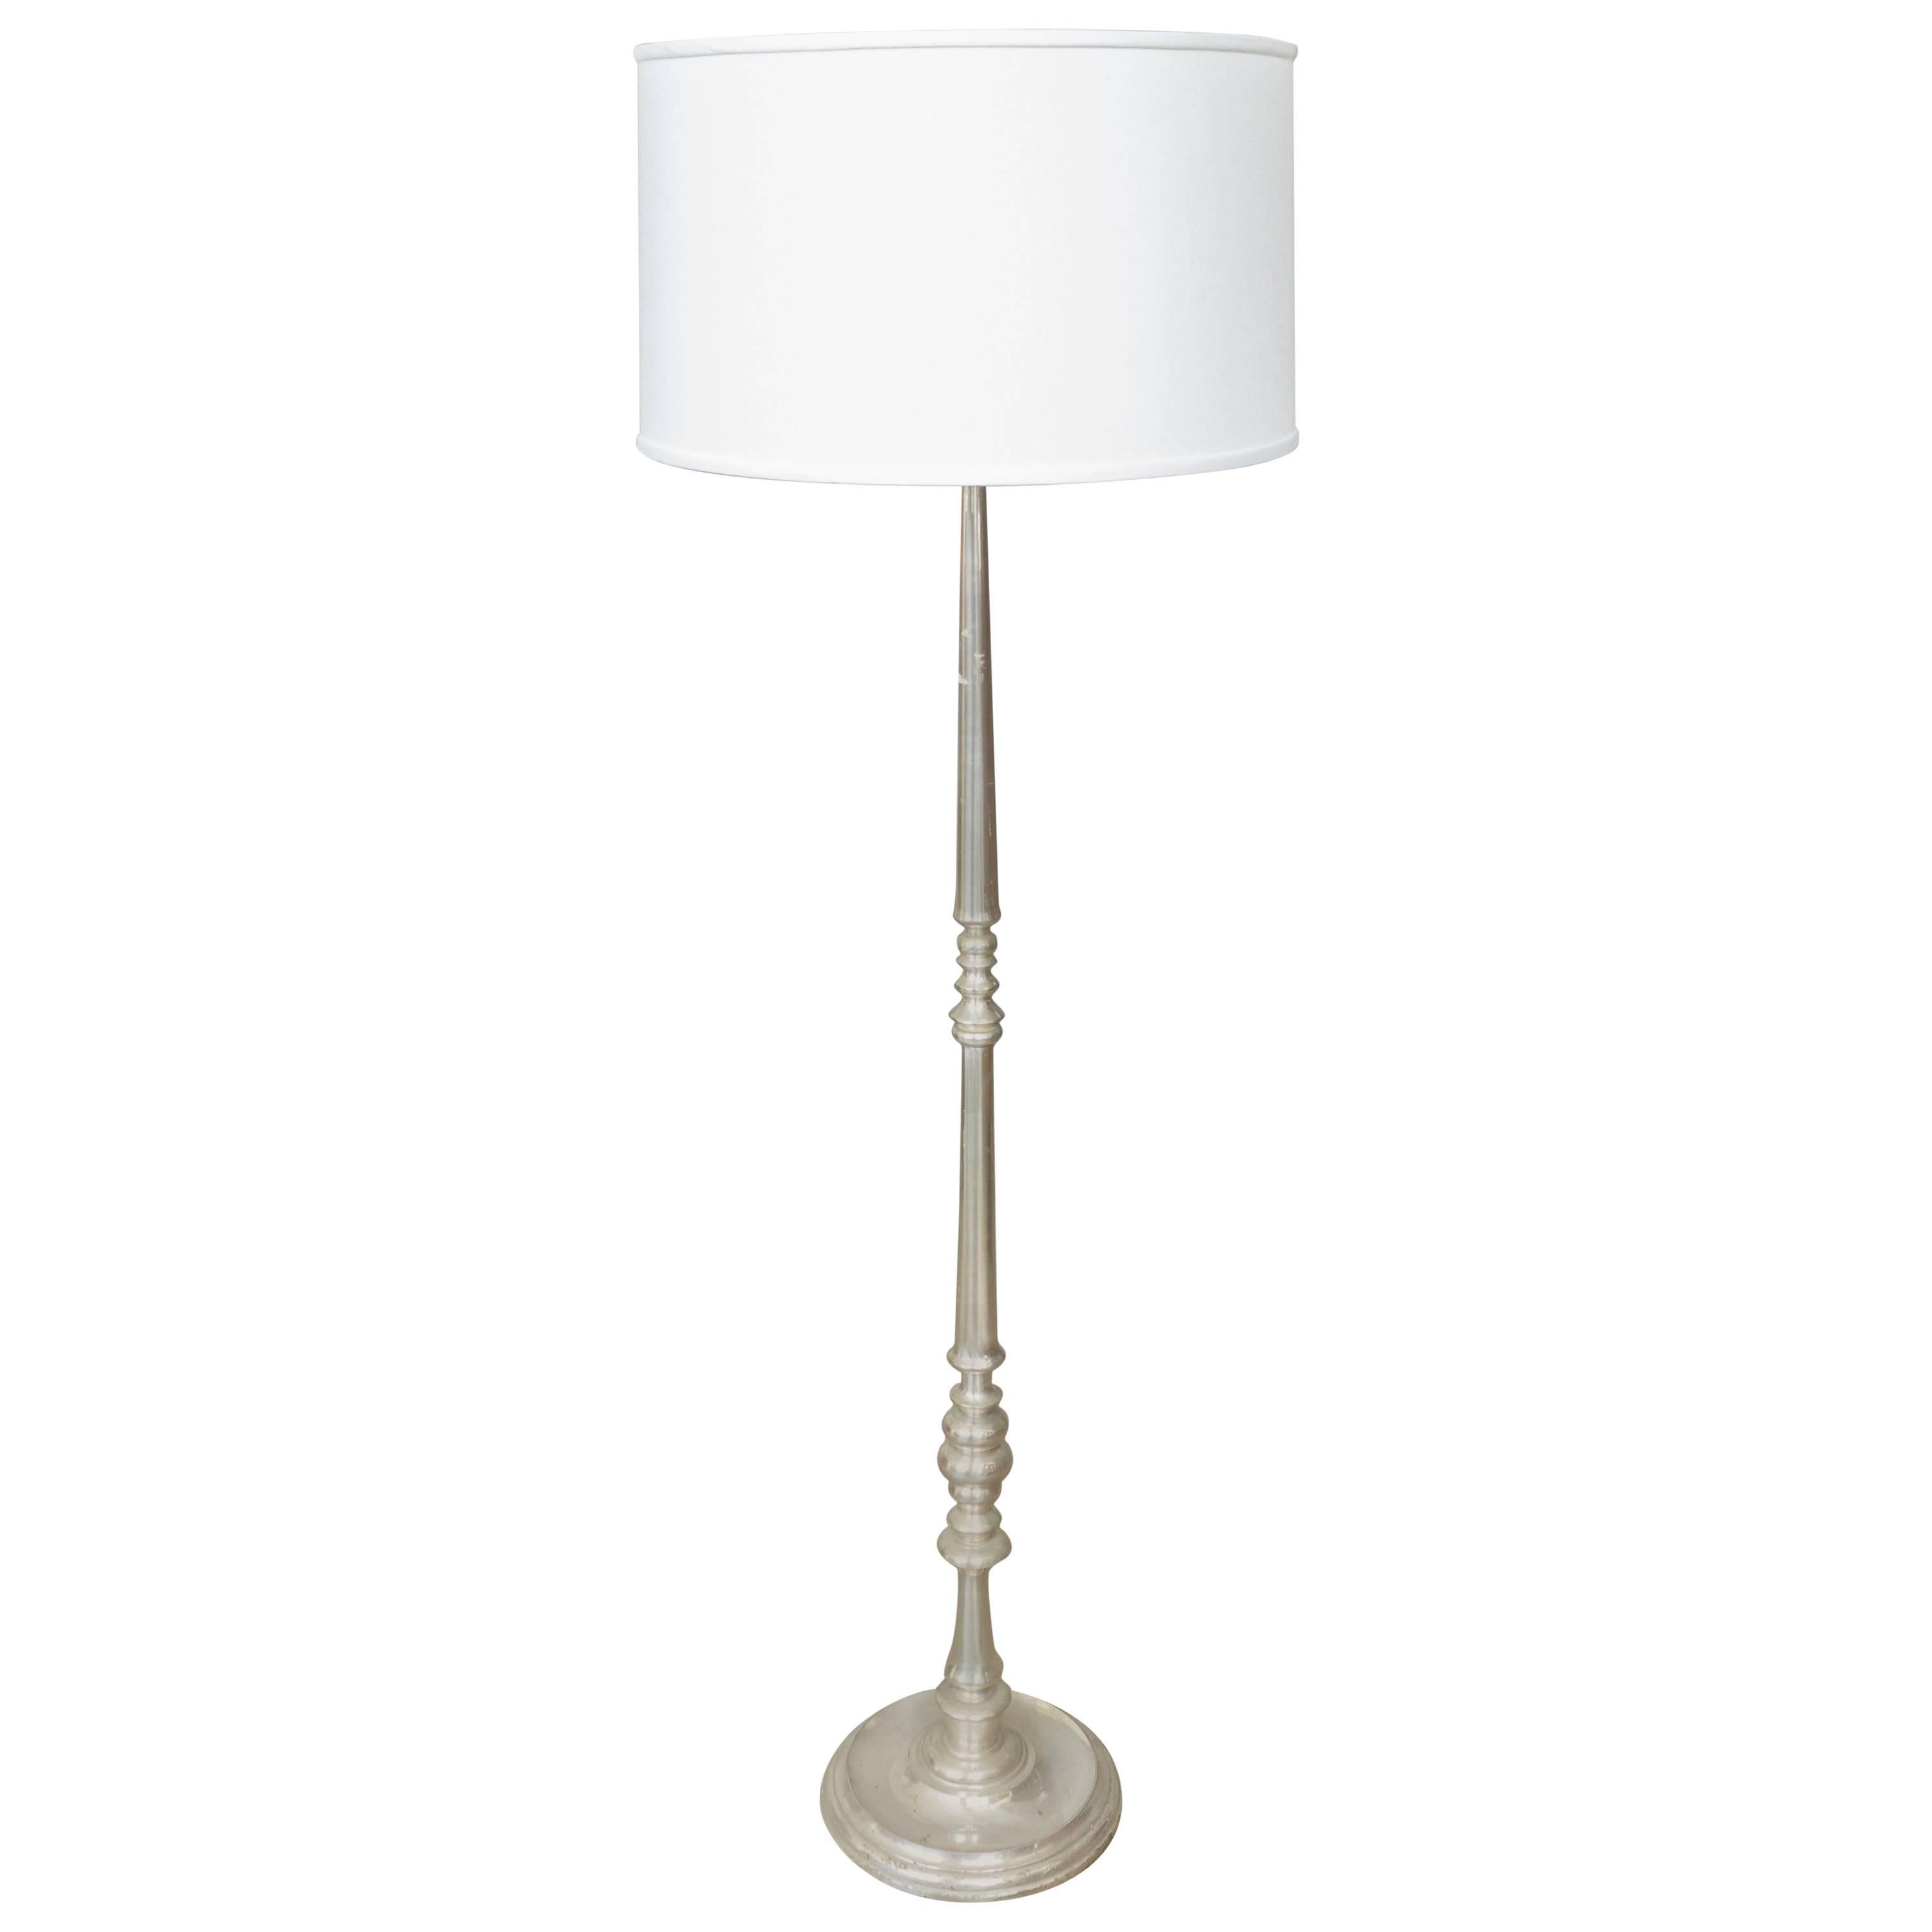 Midcentury French Silver Plated Floor Lamp